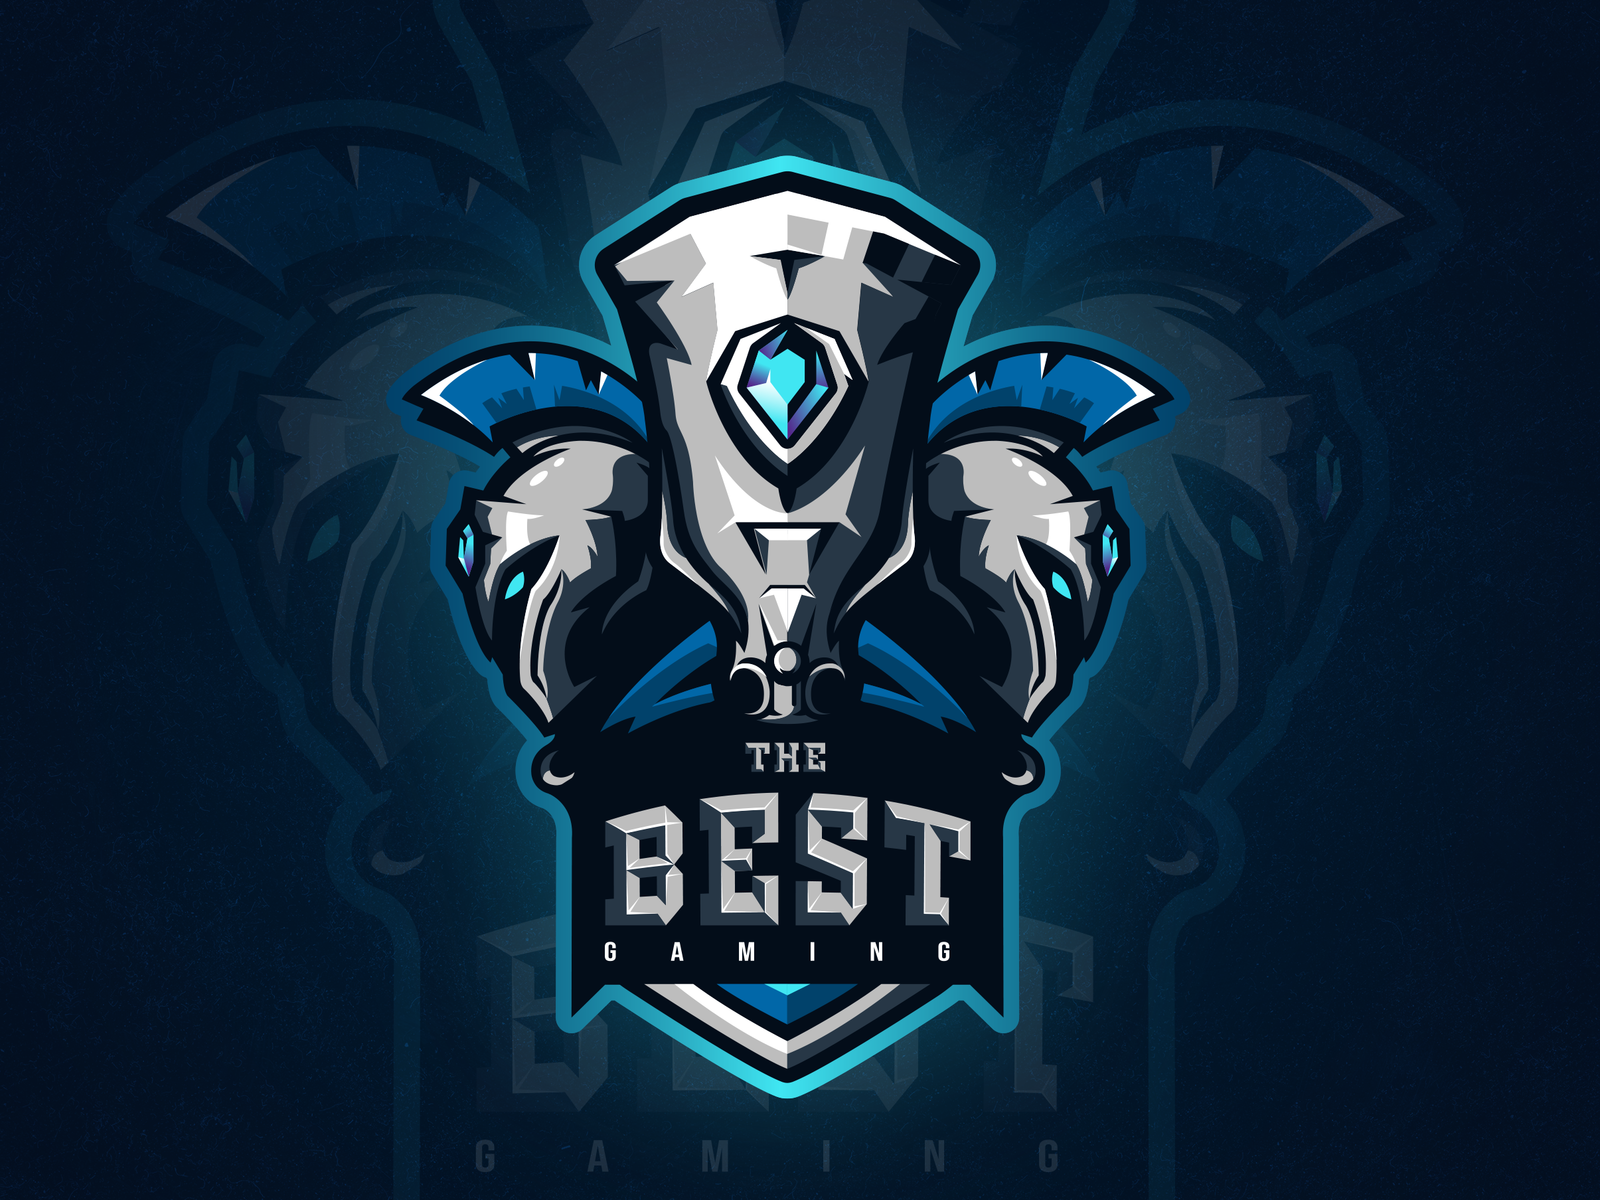 The Best Gaming Logo. by Lou An Phạm on Dribbble